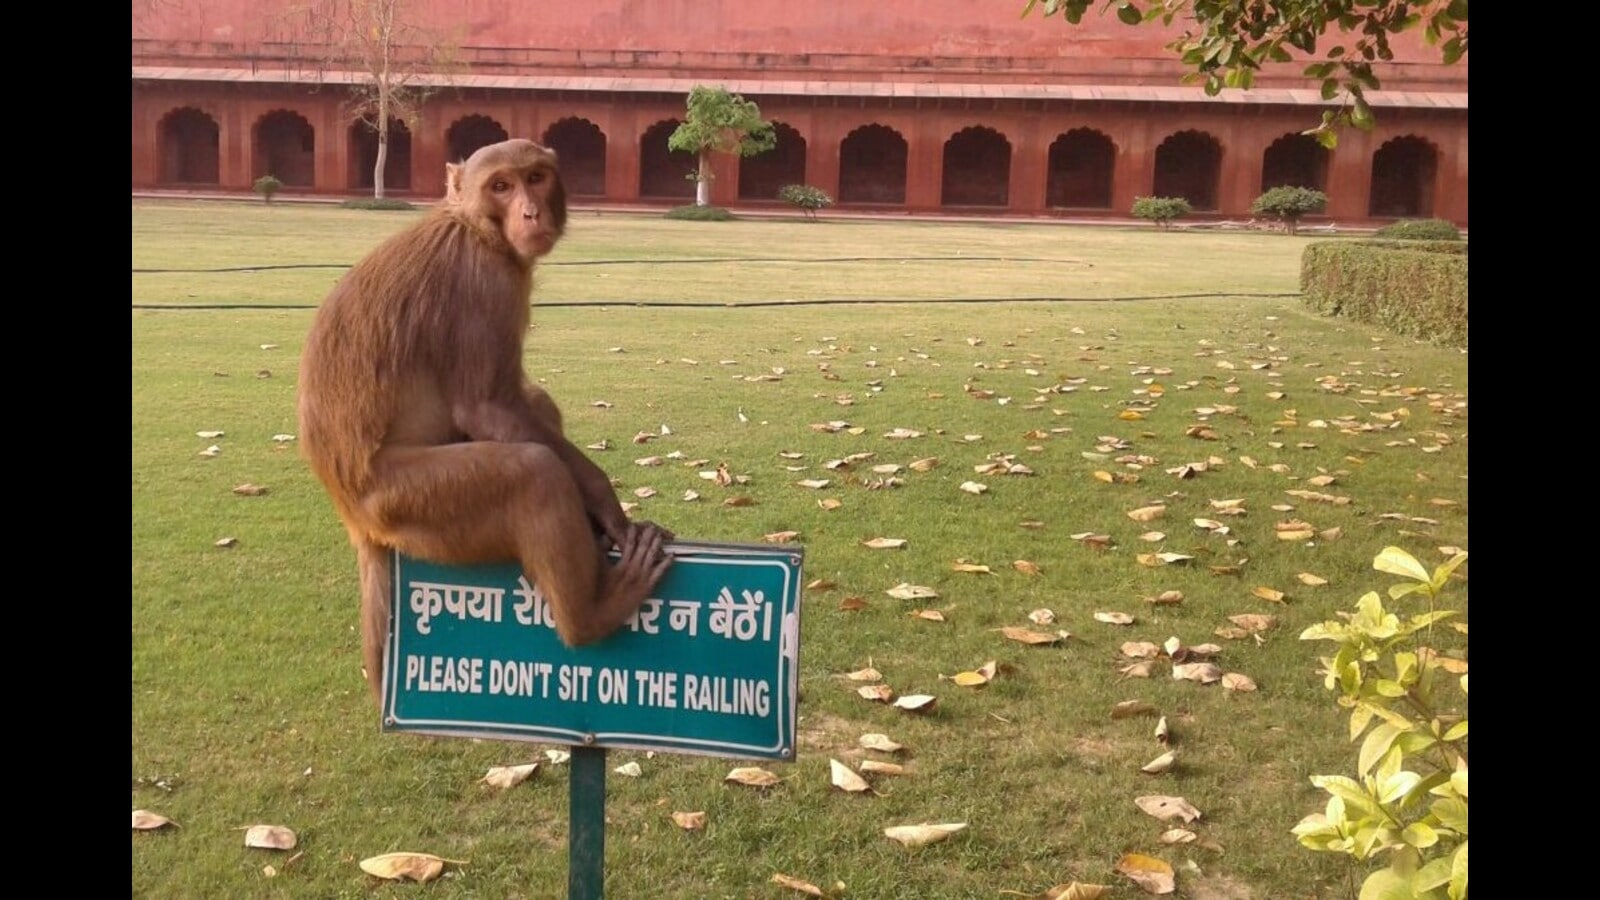 Monkey menace: where does the solution lie? - Vrindavan Today